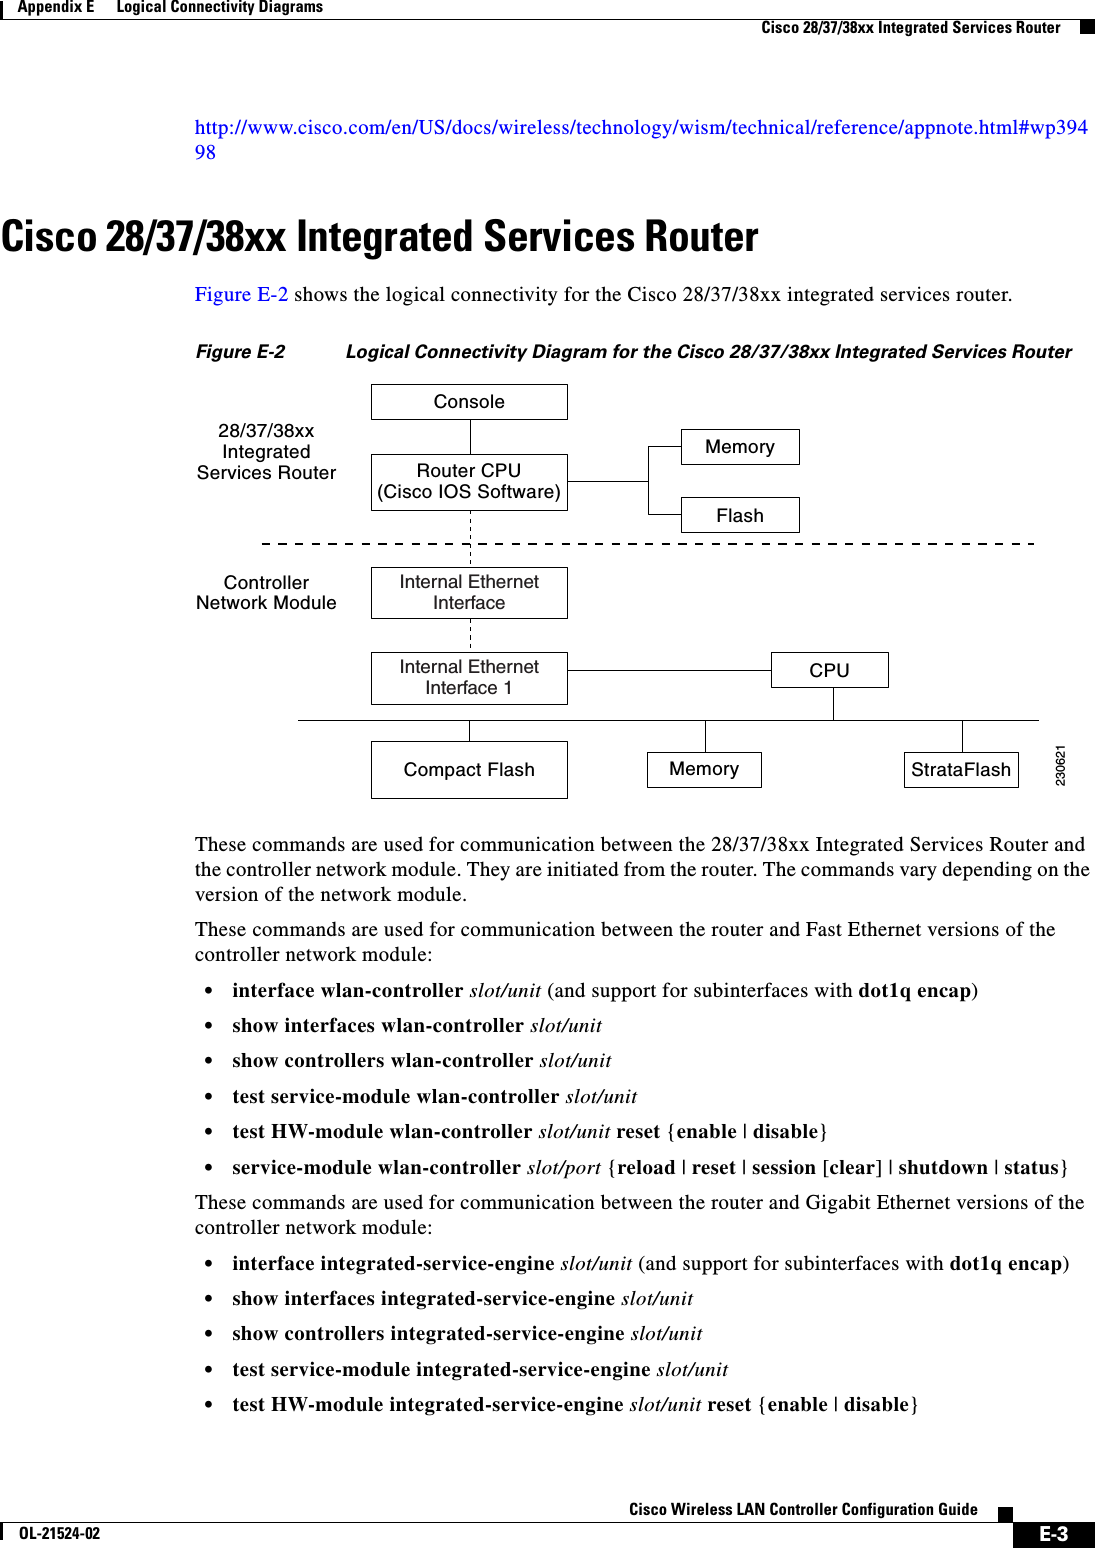  E-3Cisco Wireless LAN Controller Configuration GuideOL-21524-02Appendix E      Logical Connectivity Diagrams  Cisco 28/37/38xx Integrated Services Routerhttp://www.cisco.com/en/US/docs/wireless/technology/wism/technical/reference/appnote.html#wp39498Cisco 28/37/38xx Integrated Services RouterFigure E-2 shows the logical connectivity for the Cisco 28/37/38xx integrated services router.Figure E-2 Logical Connectivity Diagram for the Cisco 28/37/38xx Integrated Services Router These commands are used for communication between the 28/37/38xx Integrated Services Router and the controller network module. They are initiated from the router. The commands vary depending on the version of the network module.These commands are used for communication between the router and Fast Ethernet versions of the controller network module:  • interface wlan-controller slot/unit (and support for subinterfaces with dot1q encap)  • show interfaces wlan-controller slot/unit  • show controllers wlan-controller slot/unit  • test service-module wlan-controller slot/unit  • test HW-module wlan-controller slot/unit reset {enable | disable}  • service-module wlan-controller slot/port {reload | reset | session [clear] | shutdown | status}These commands are used for communication between the router and Gigabit Ethernet versions of the controller network module:  • interface integrated-service-engine slot/unit (and support for subinterfaces with dot1q encap)  • show interfaces integrated-service-engine slot/unit  • show controllers integrated-service-engine slot/unit  • test service-module integrated-service-engine slot/unit  • test HW-module integrated-service-engine slot/unit reset {enable | disable}Console28/37/38xxIntegratedServices RouterControllerNetwork ModuleRouter CPU(Cisco IOS Software)MemoryFlashInternal EthernetInterfaceInternal EthernetInterface 1 CPUCompact Flash Memory StrataFlash230621